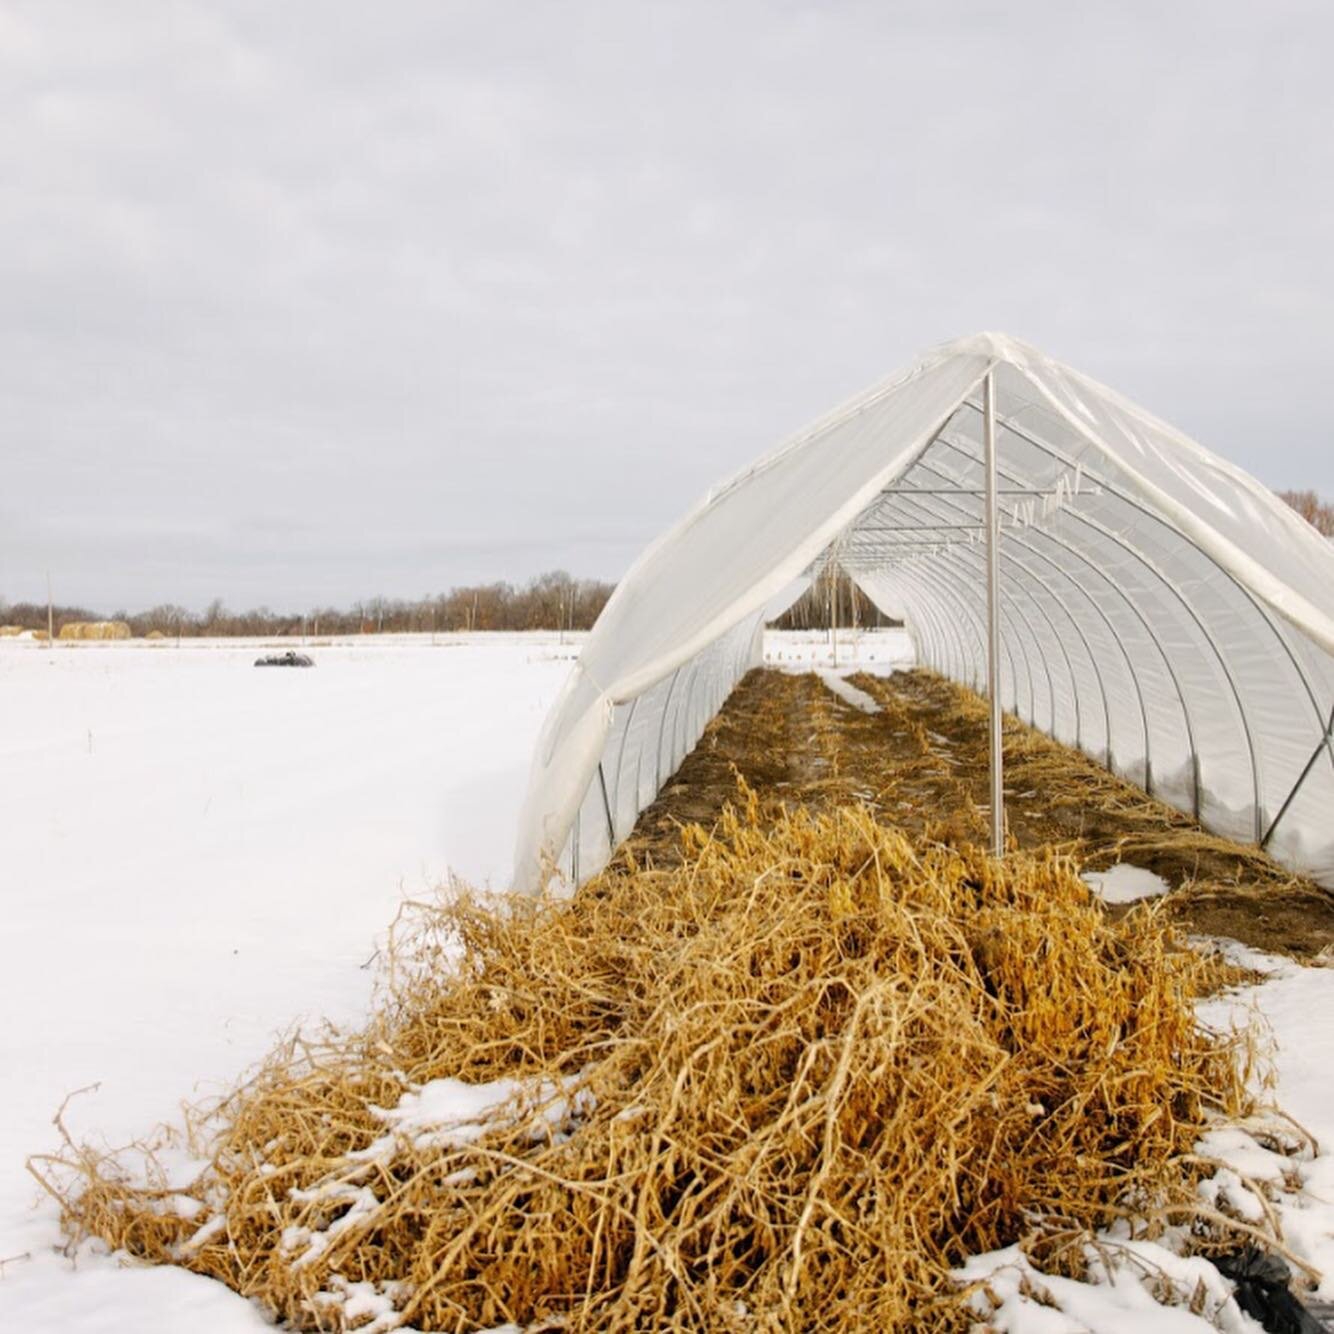 Winter on the farm. Photos taken by talentednn by photographer, Sarah Champeau- @champeau . I especially like the 2nd photo- the whole farm folded in to a tiny greenhouse to over winter!